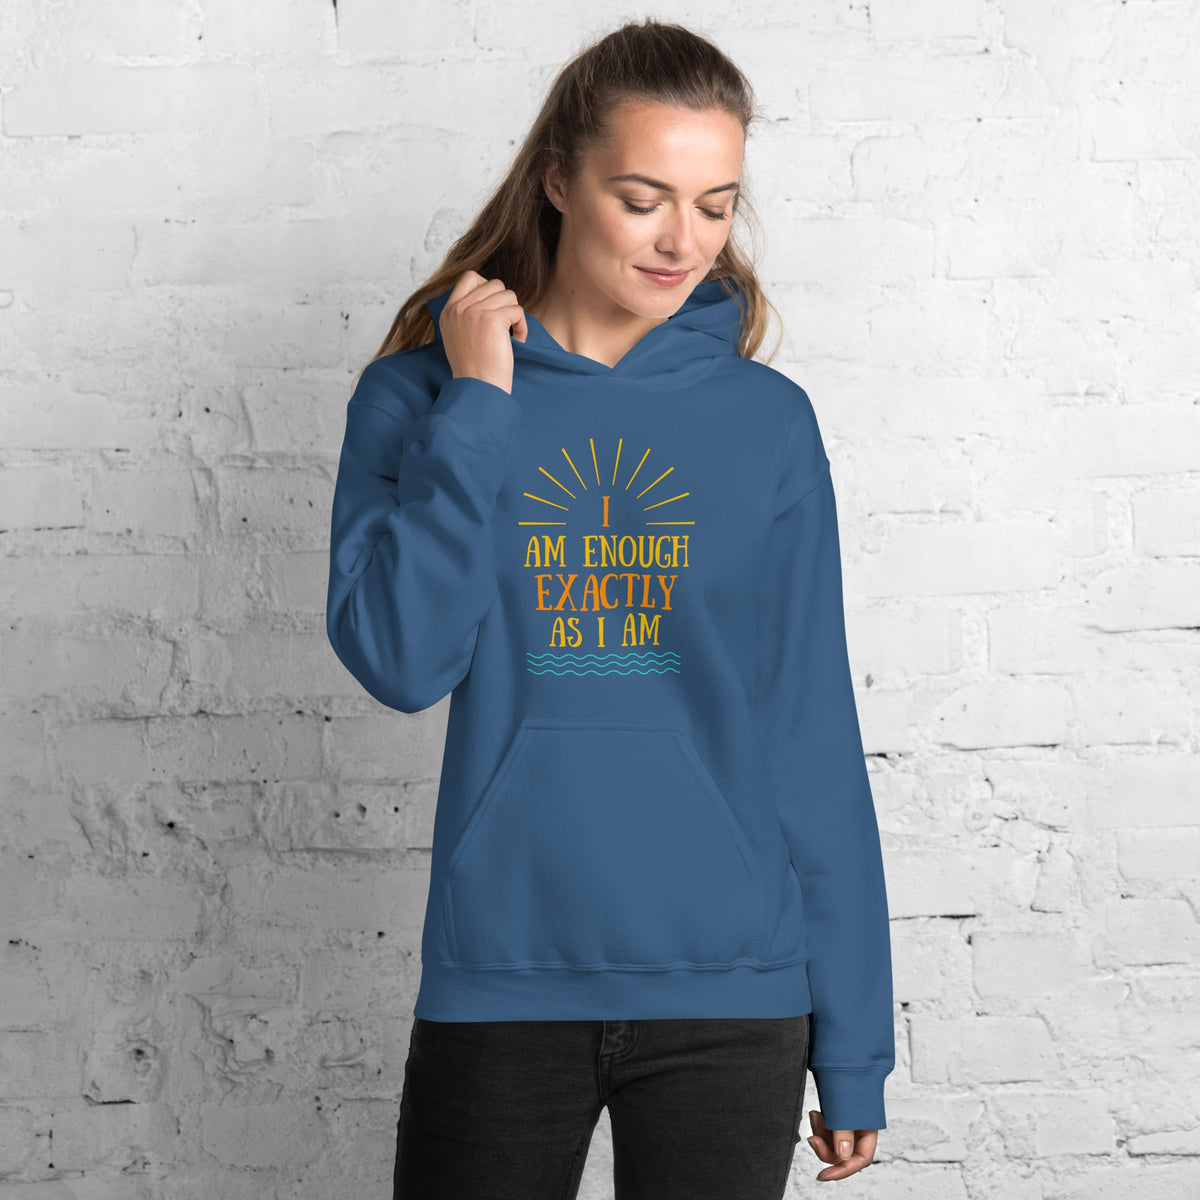 I AM ENOUGH EXACTLY AS I AM - Affirmation Vintage Hoodie for Women | I Am Enough Collection